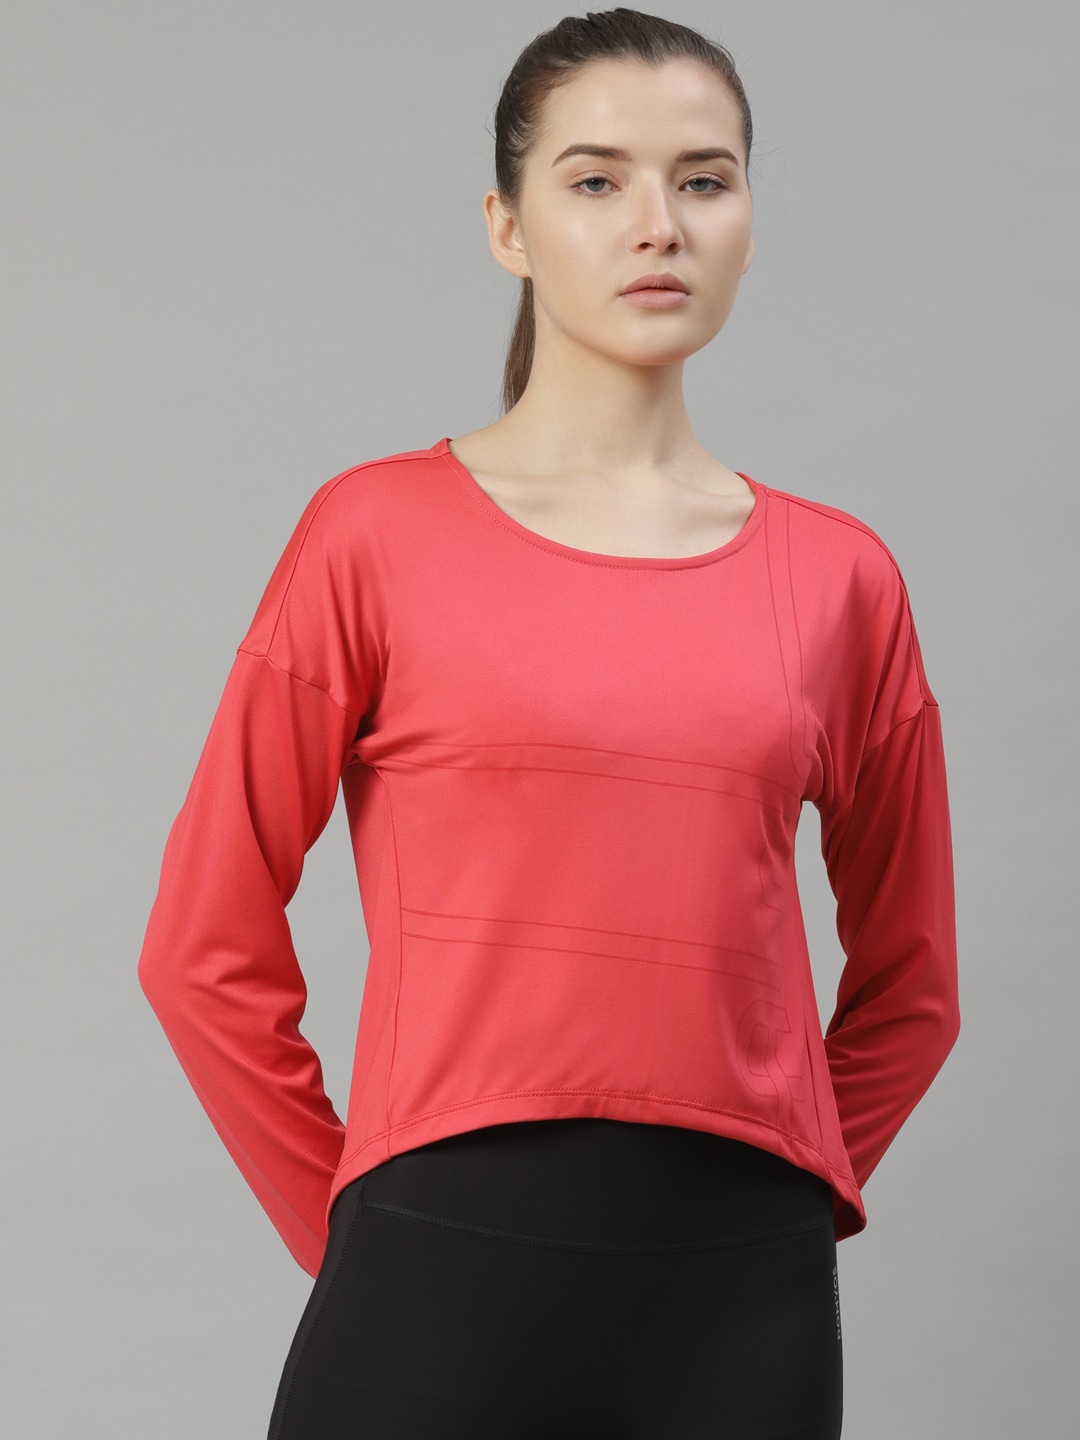 Alcis Women Pink Striped Slim Fit Round Neck T-shirt Price in India